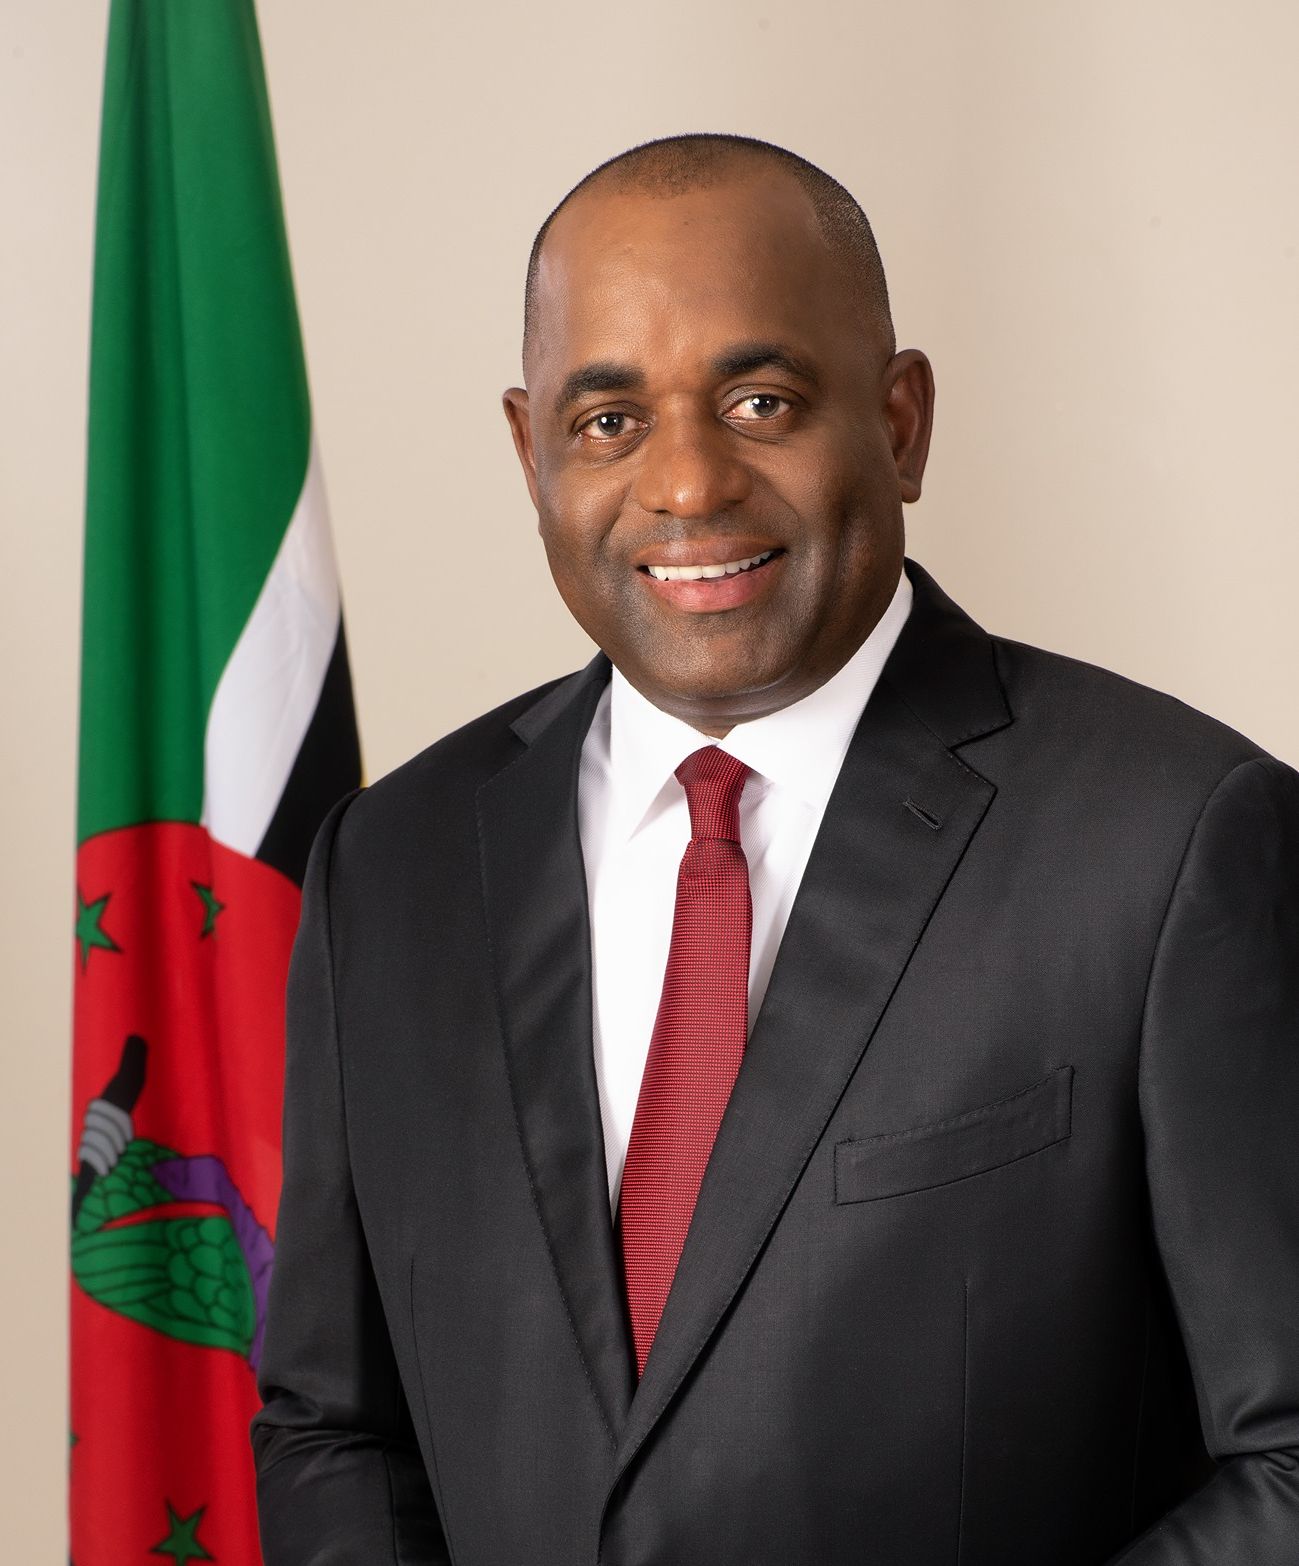 PRIME MINISTER ROOSEVELT SKERRIT TO ASSUME CARICOM CHAIRMANSHIP AT 45TH CONFERENCE OF CARICOM HEADS OF GOVERNMENT